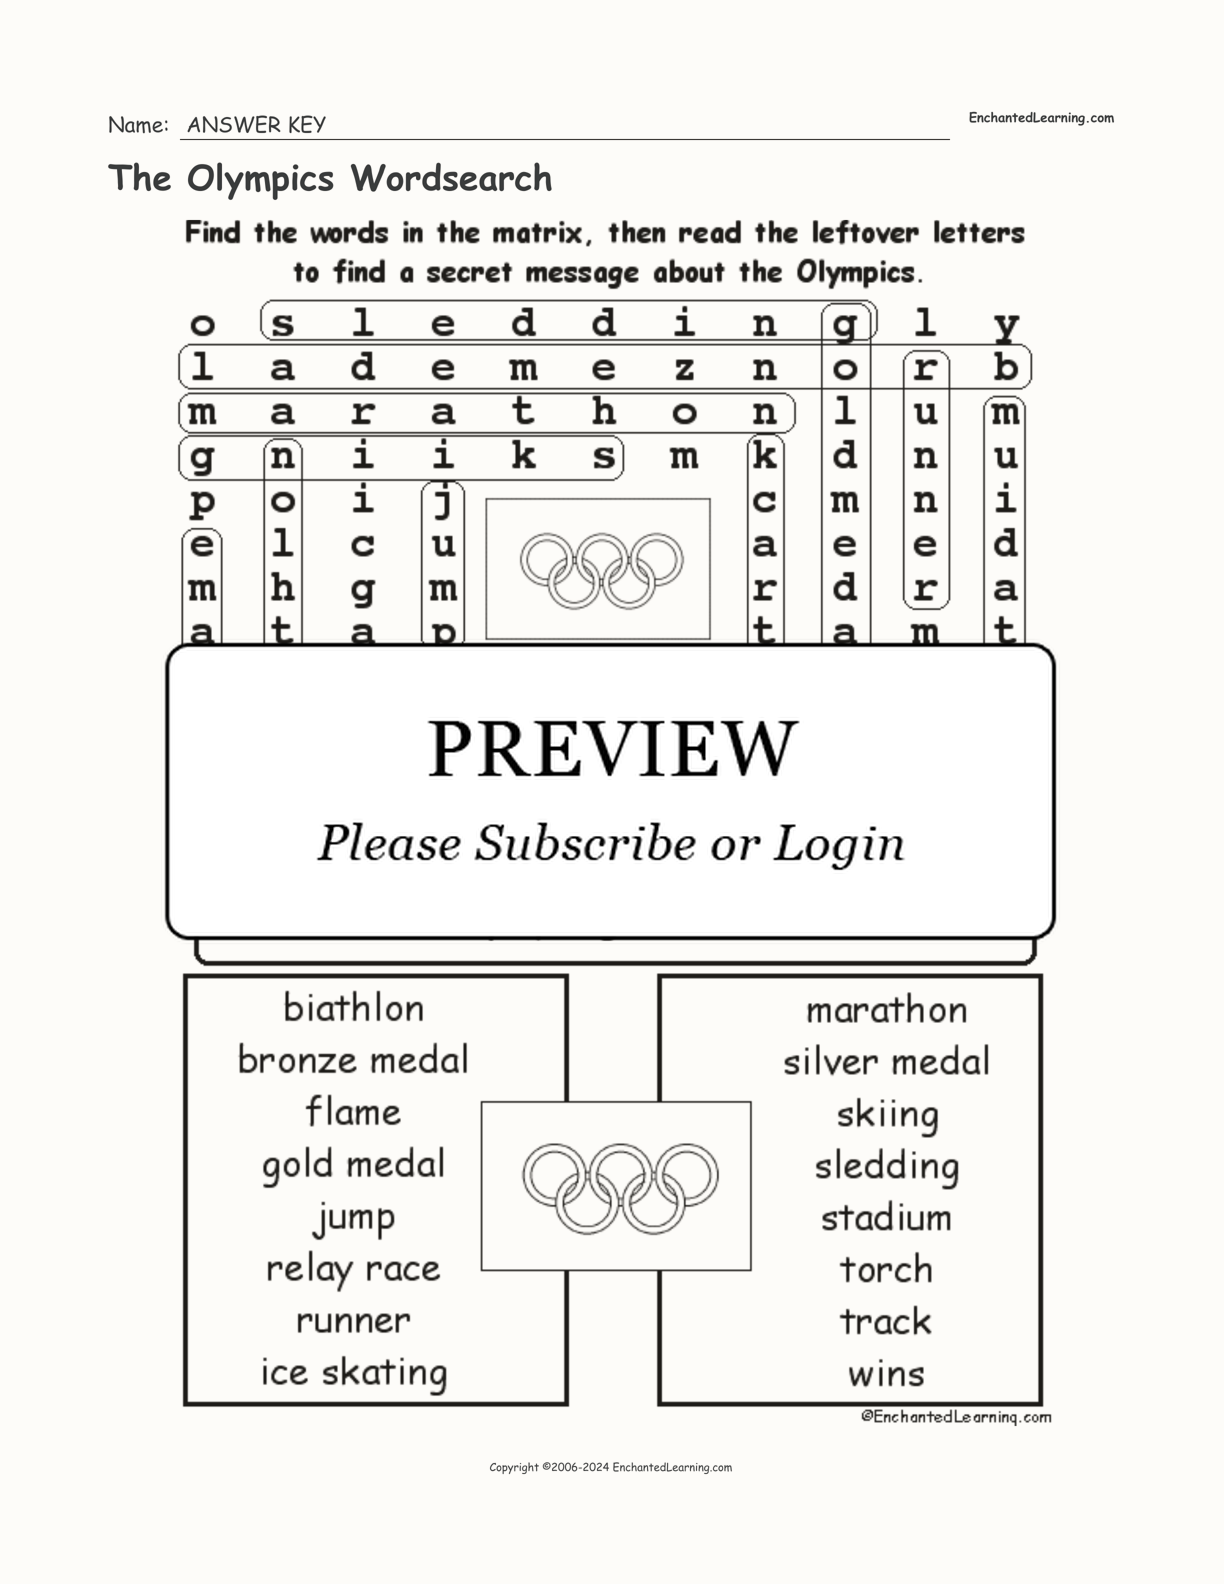 The Olympics Wordsearch interactive worksheet page 2